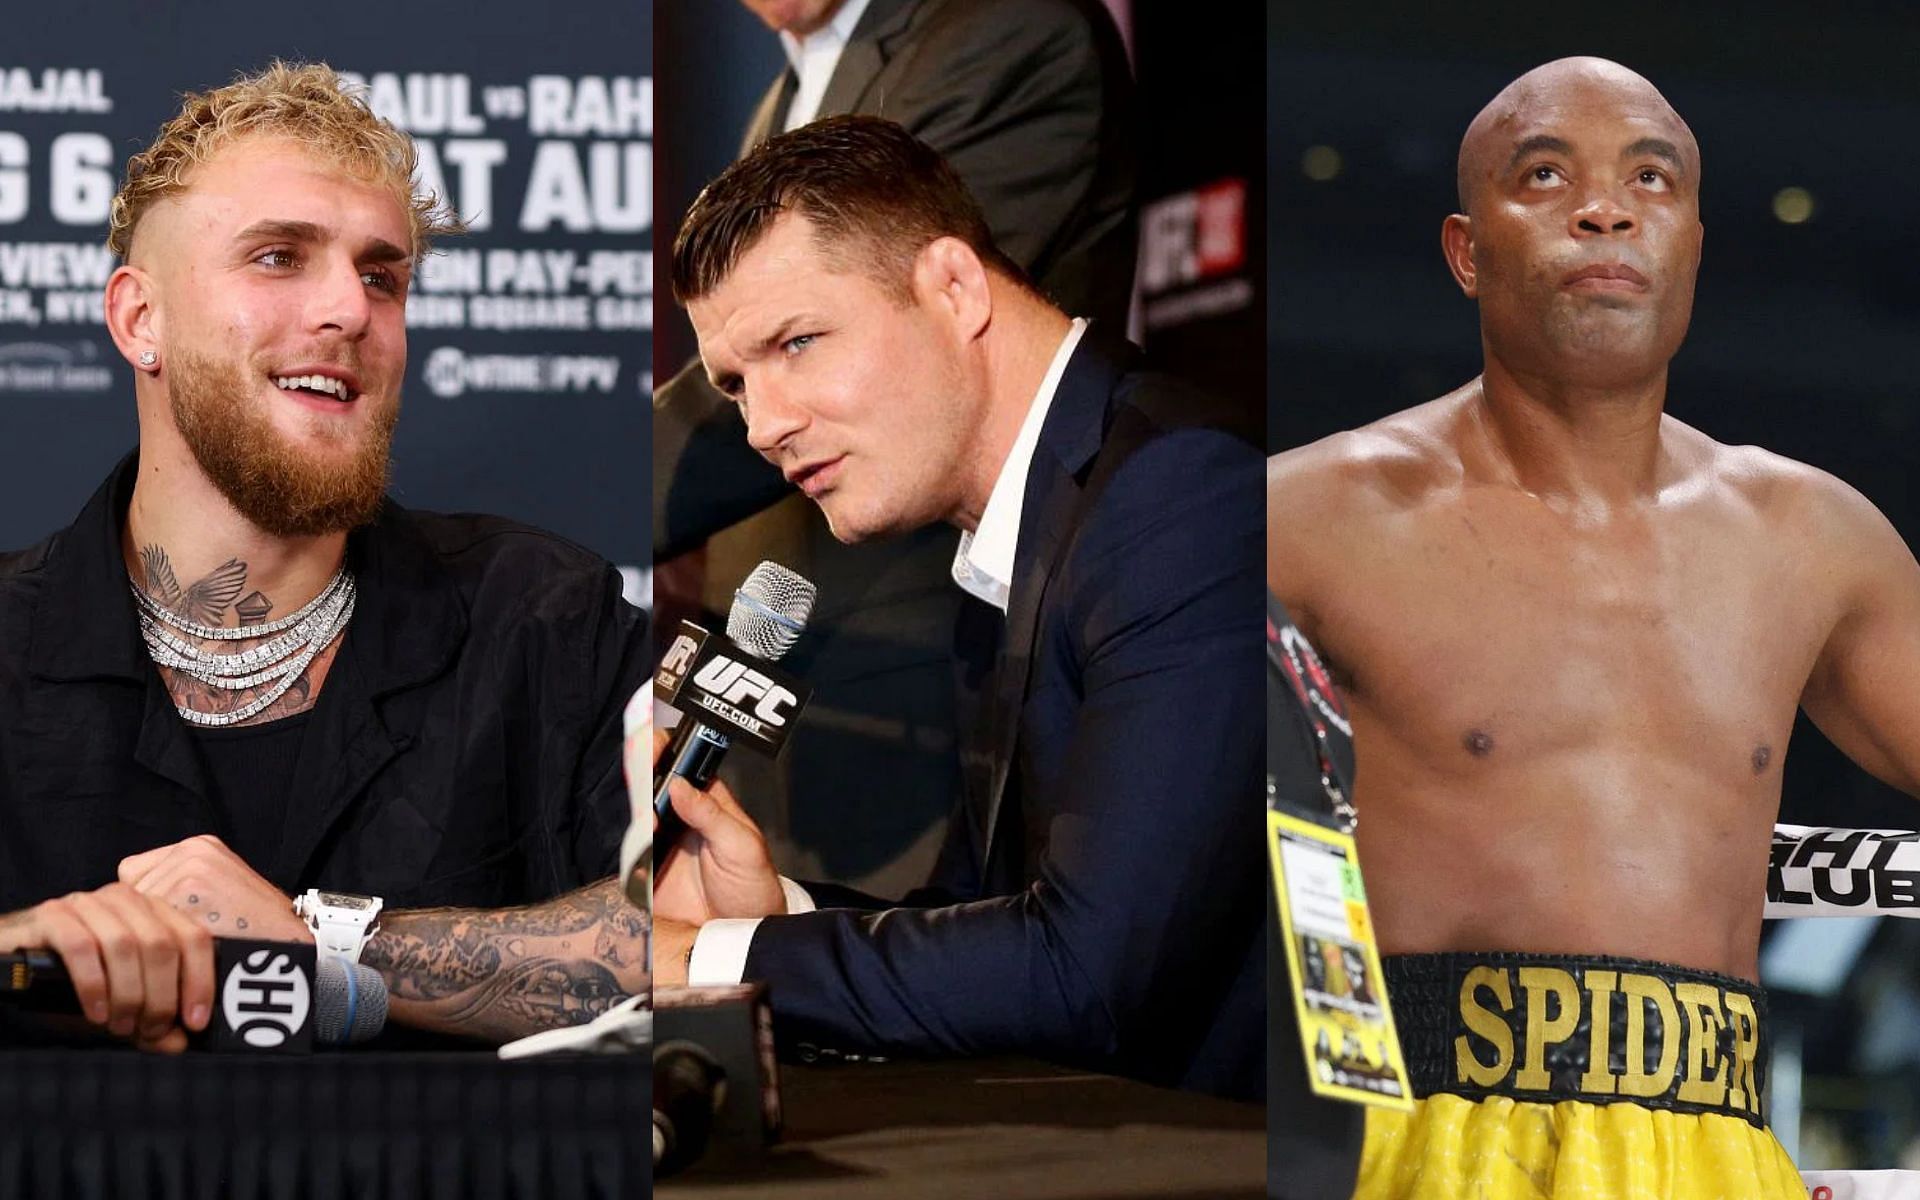 Jake Paul (left), Michael Bisping (middle) and Anderson Silva (right) 